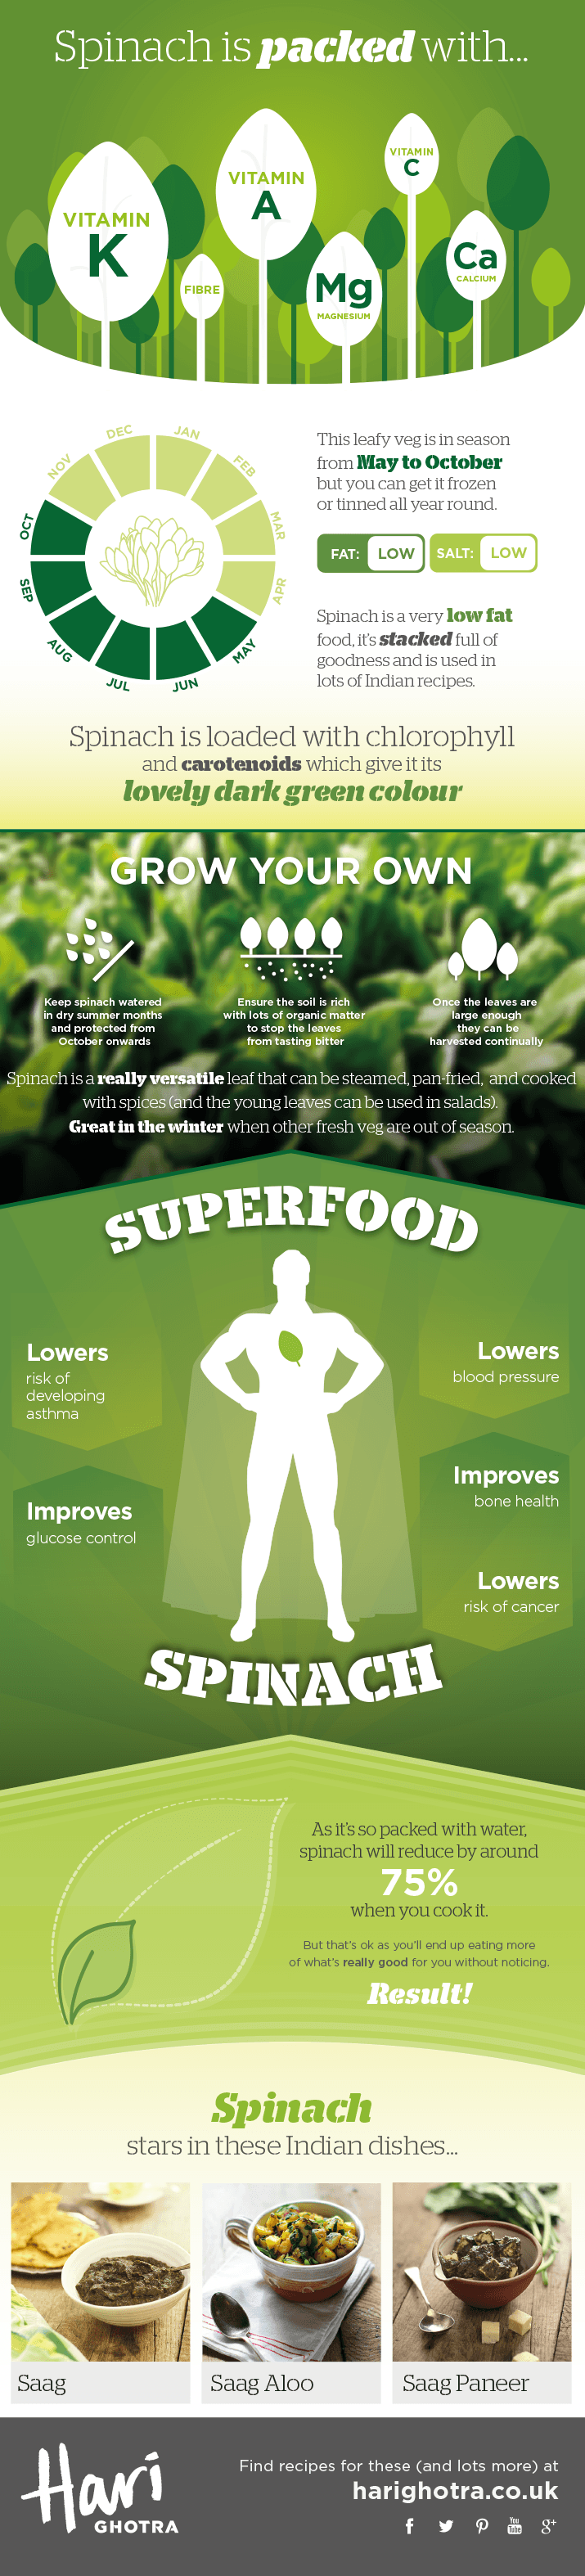 Spinach Infographic showing the health benefits of Spinach